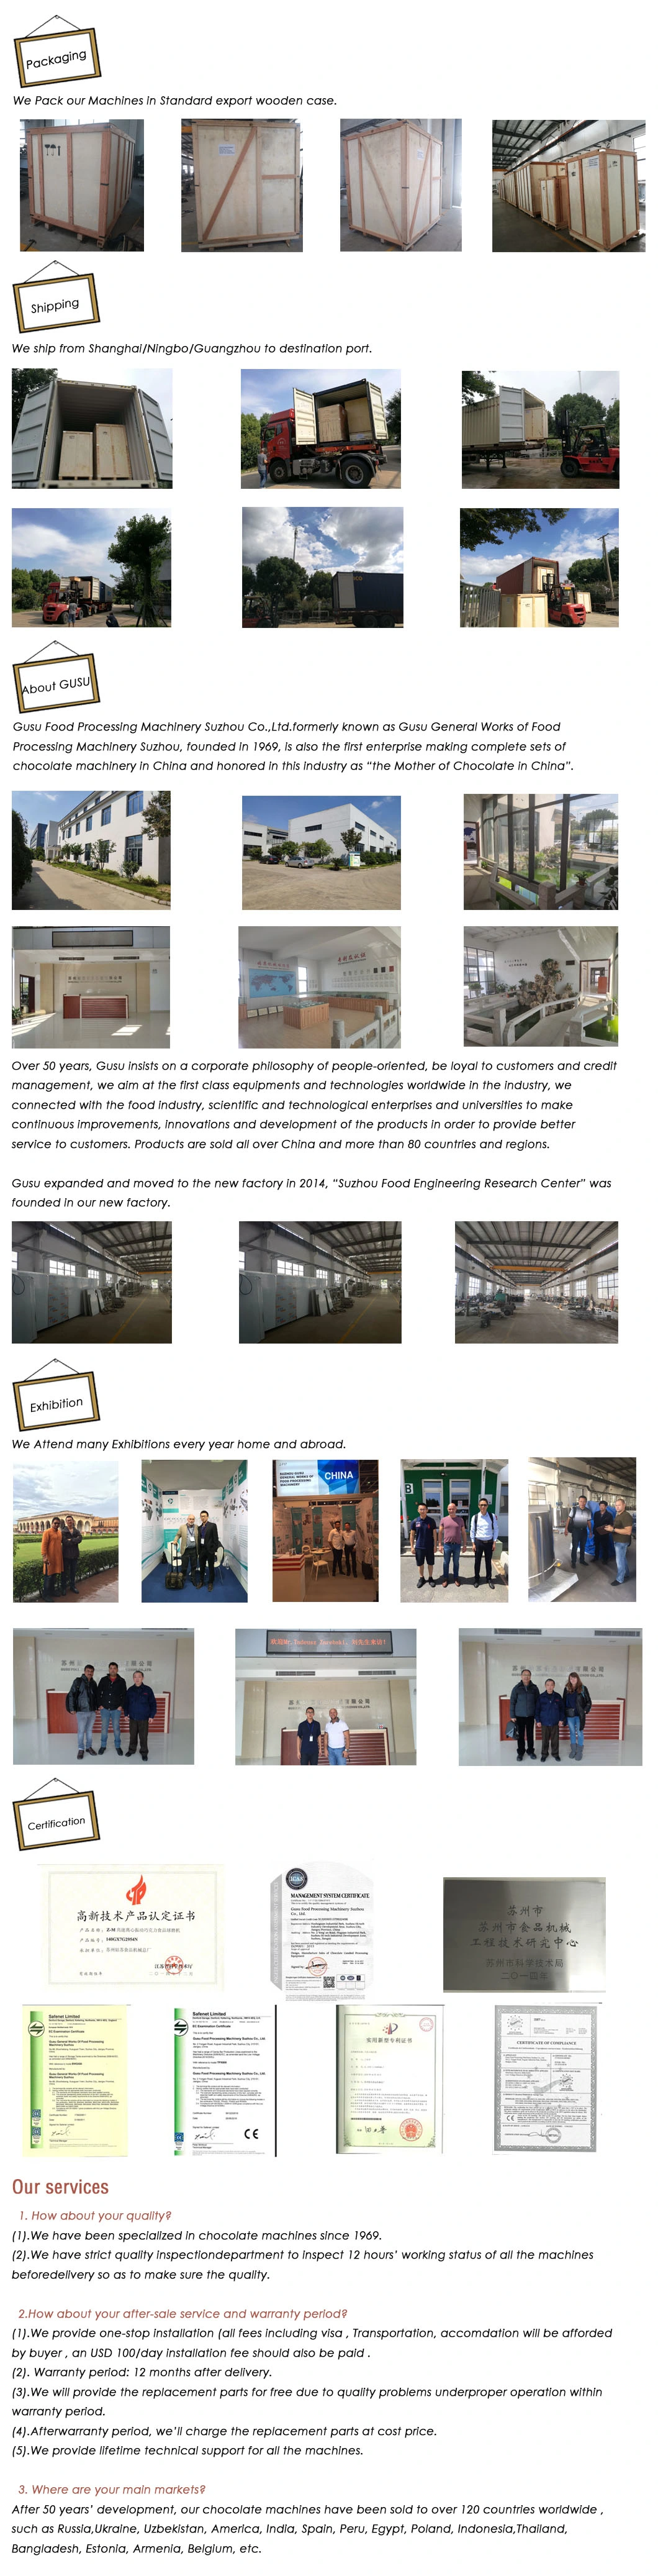 Specialized in Producing Chocolate Paste Storage Tank Volume 100